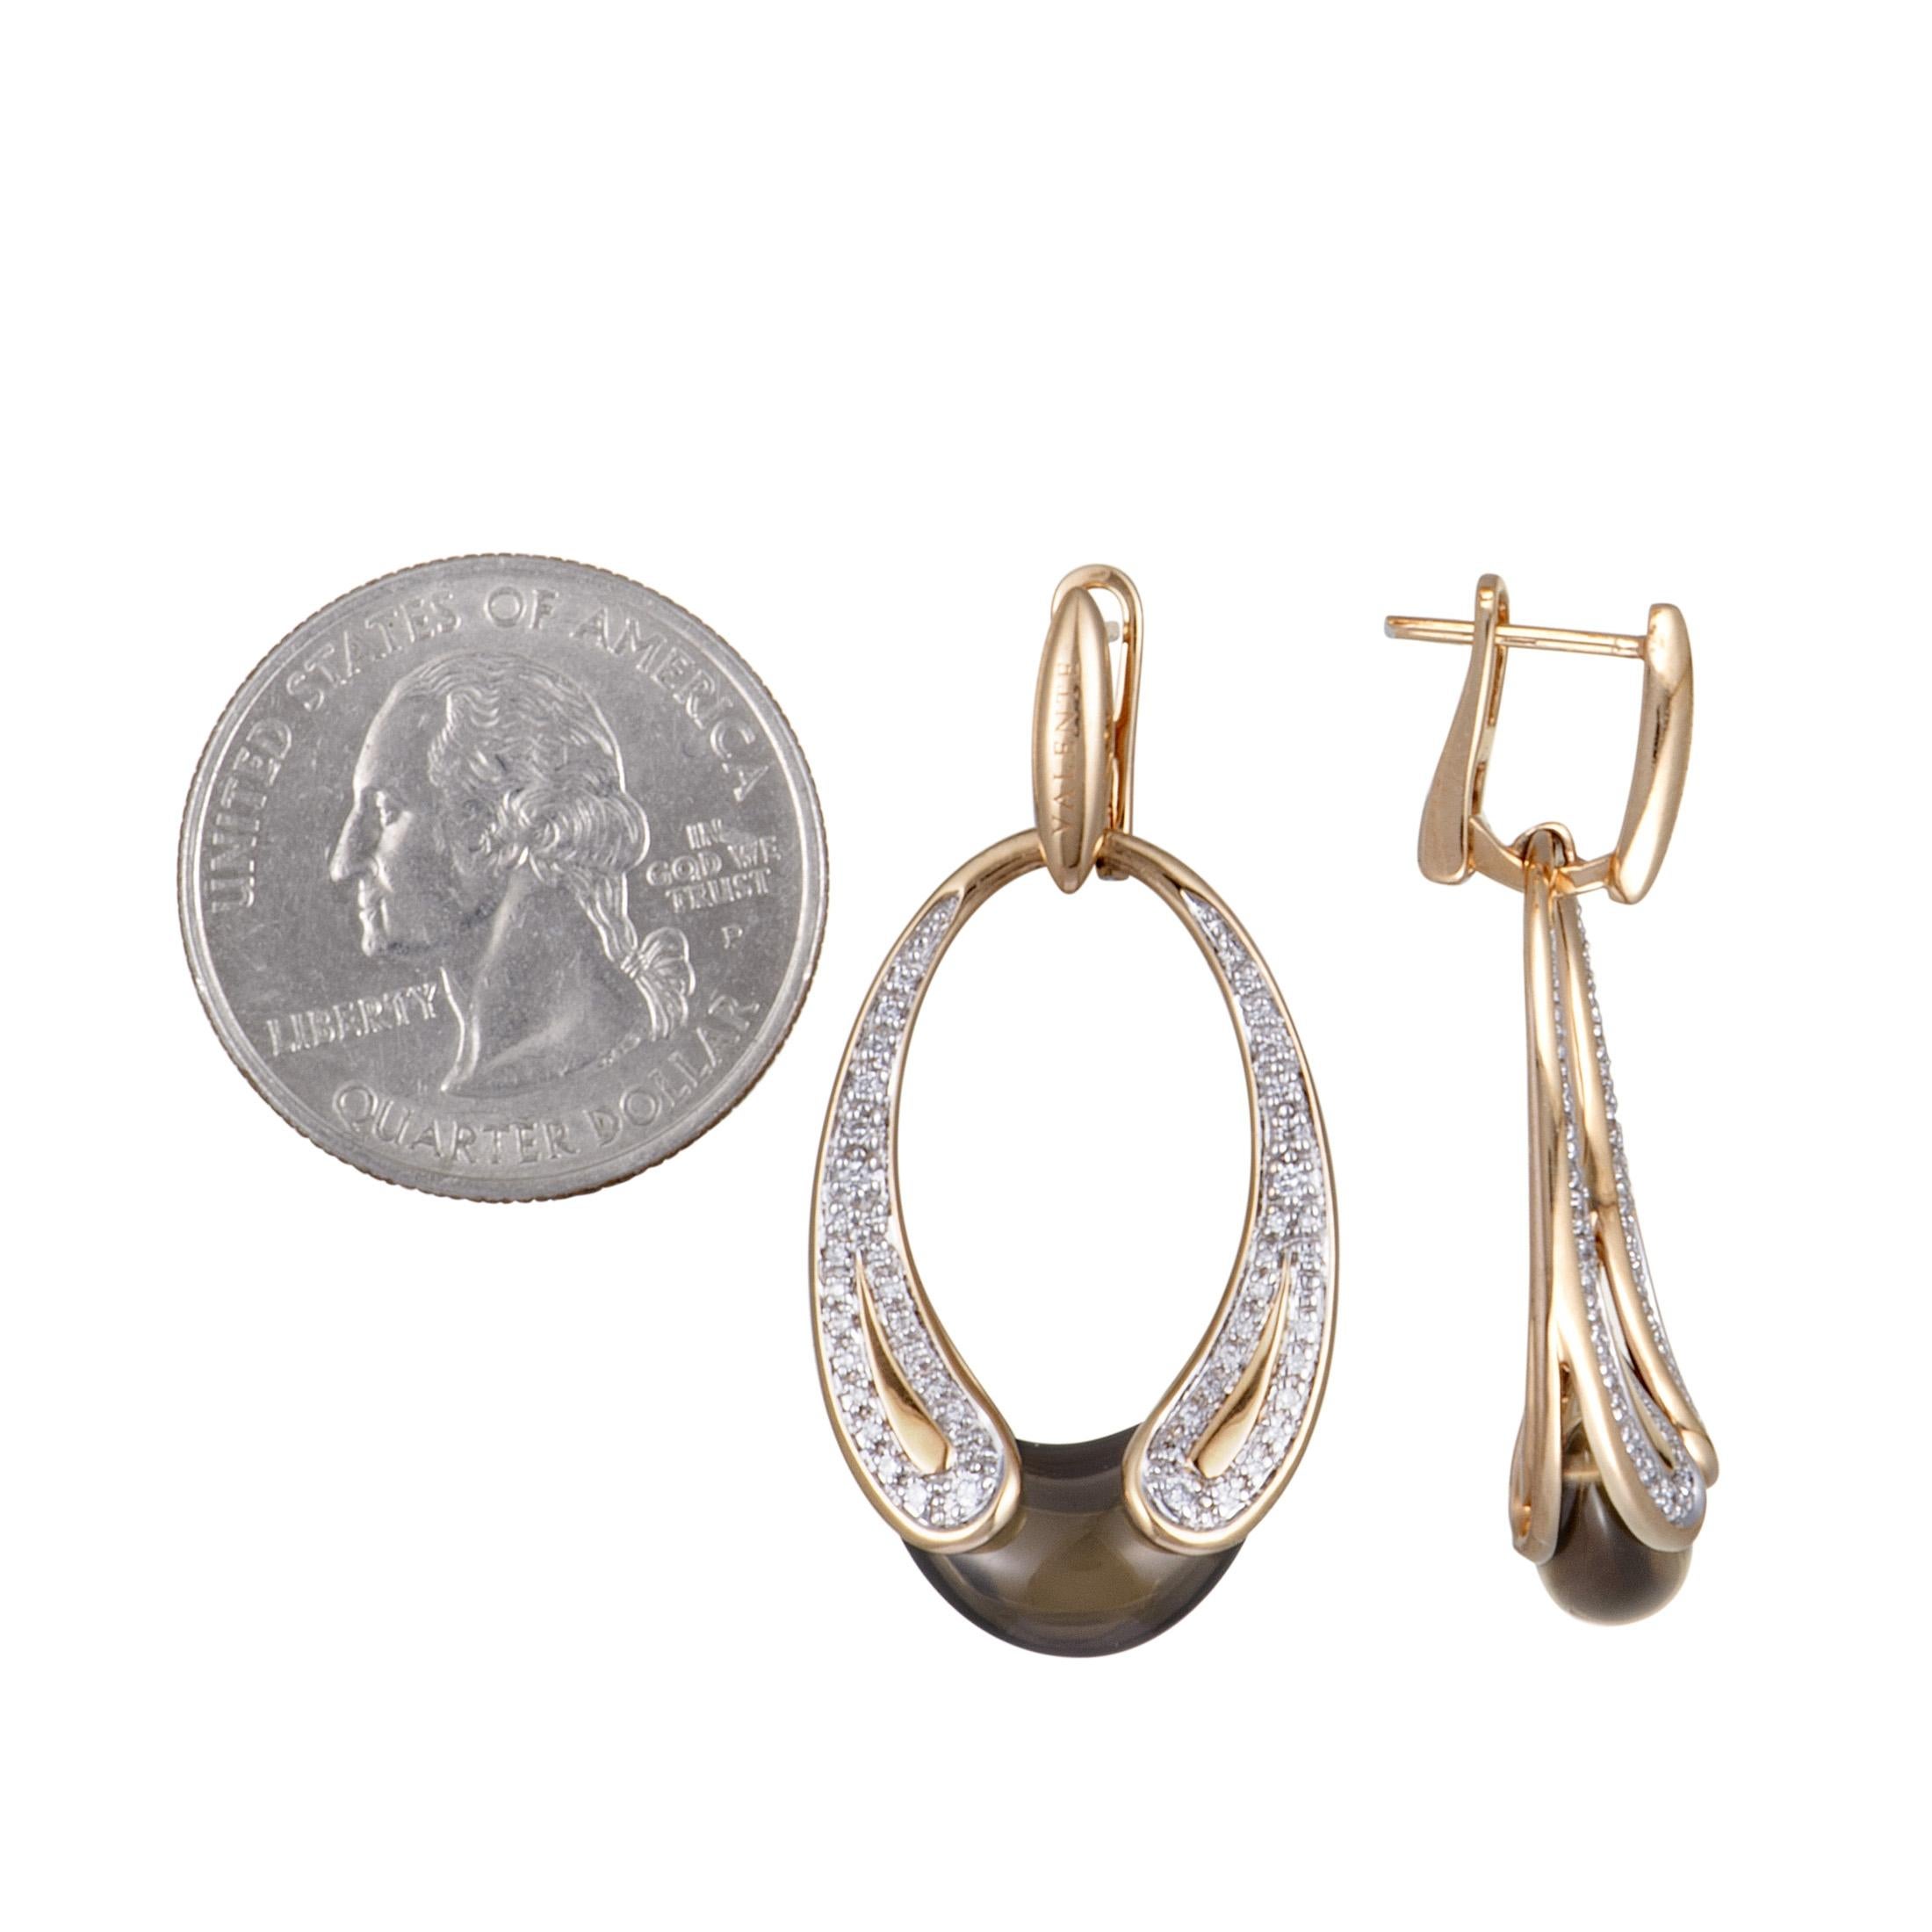 Boasting a splendidly elegant design that is beautifully topped off with a classy blend of lustrous white diamonds and sublime smoky quartz, these exceptional earrings offer a wonderfully refined appearance. Presented by Valente, the pair is made of